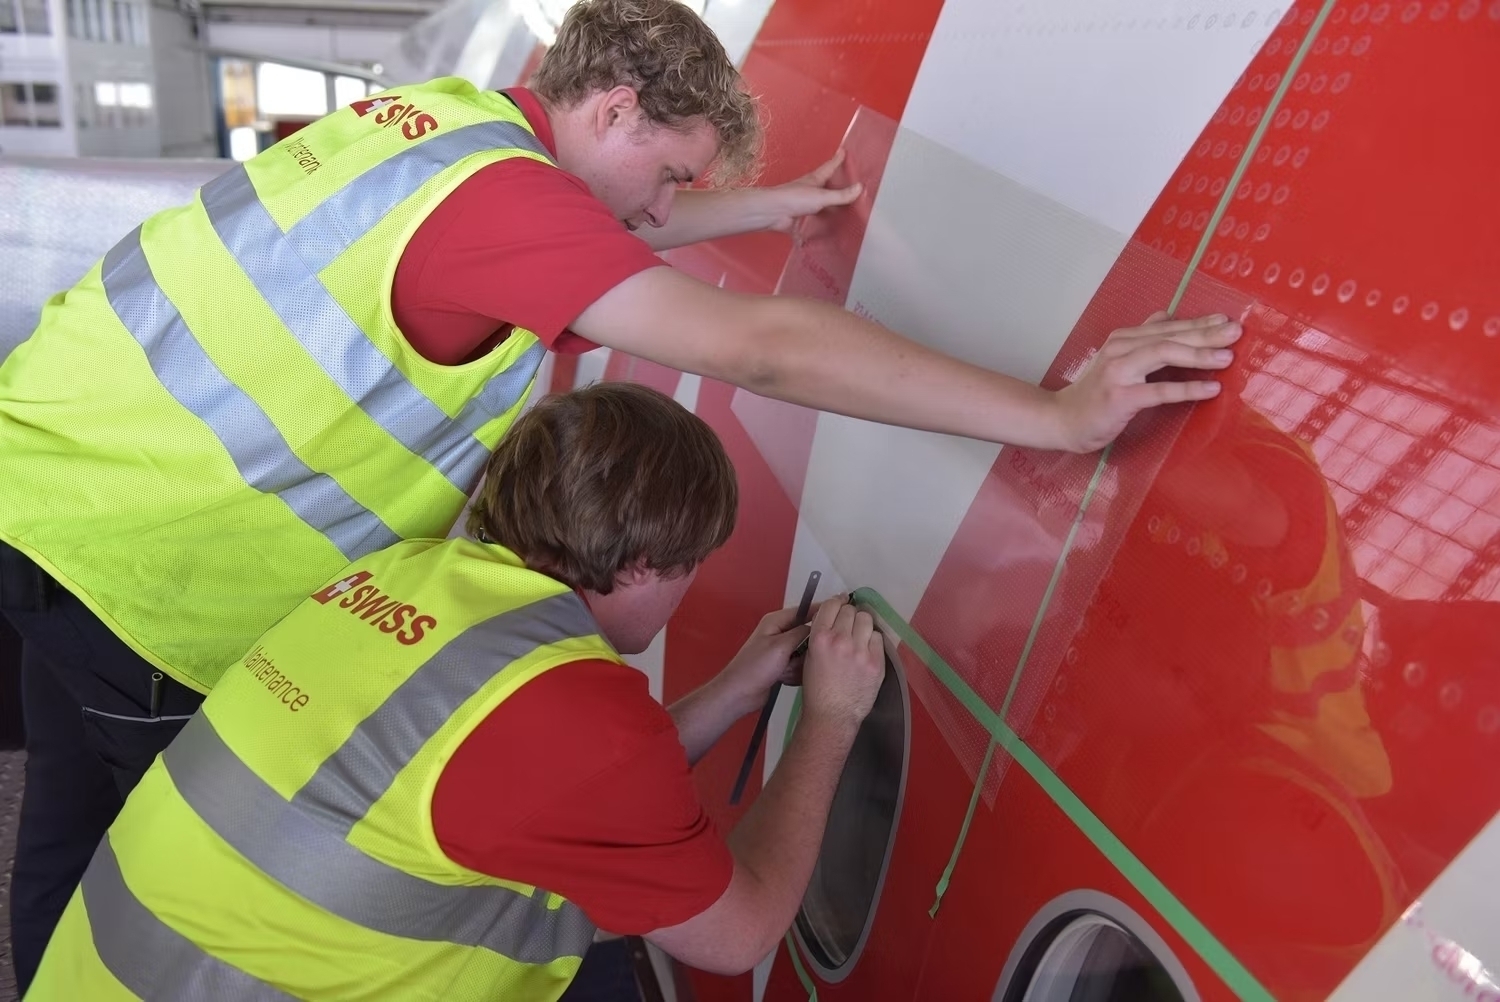 Two workers apply a shark skin-like coating, AeroSHARK, to an airplane’s red and white exterior, carefully working around a window with precision tools.